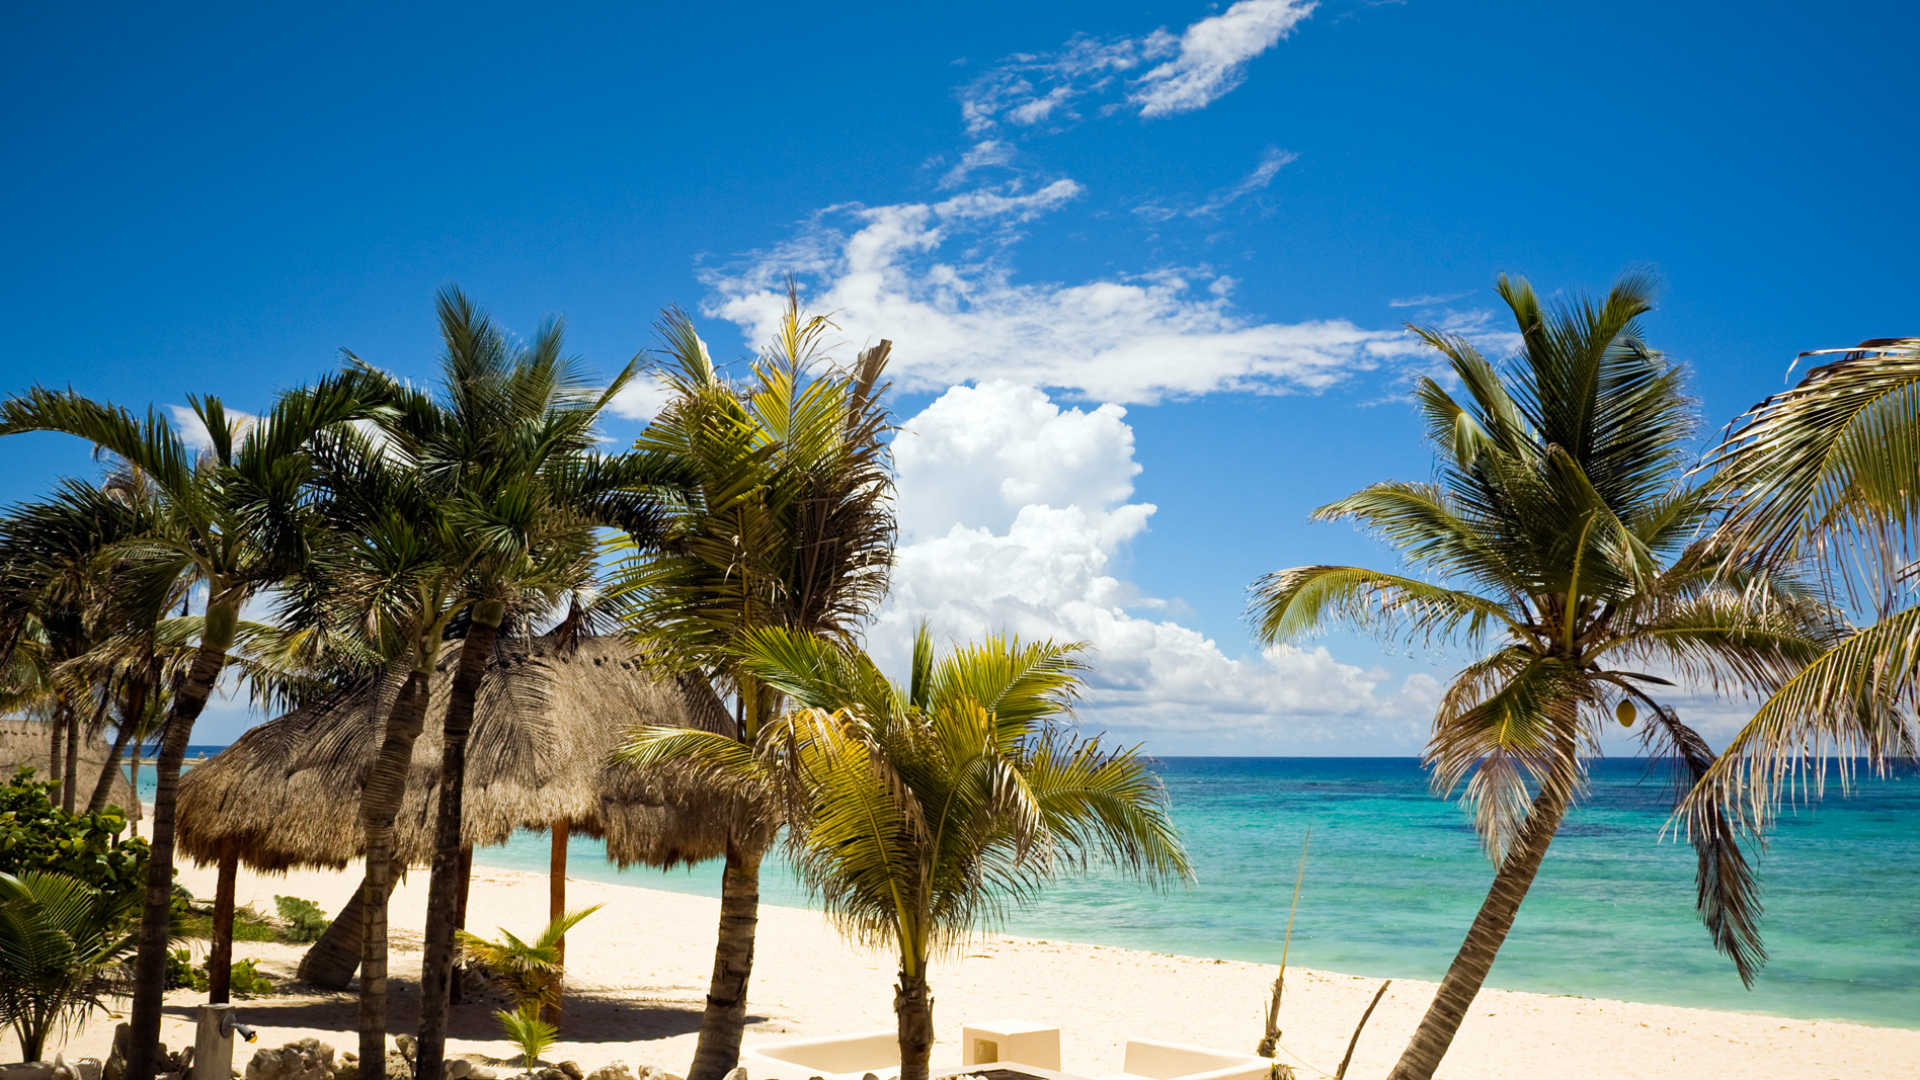 Free download Mayan Riviera Playa Del Carmen Holidays Holidays to [1920x1080] for your Desktop, Mobile & Tablet. Explore Playa Del Carmen Wallpaper. Playa Del Carmen Wallpaper, Carmen Sandiego Wallpaper